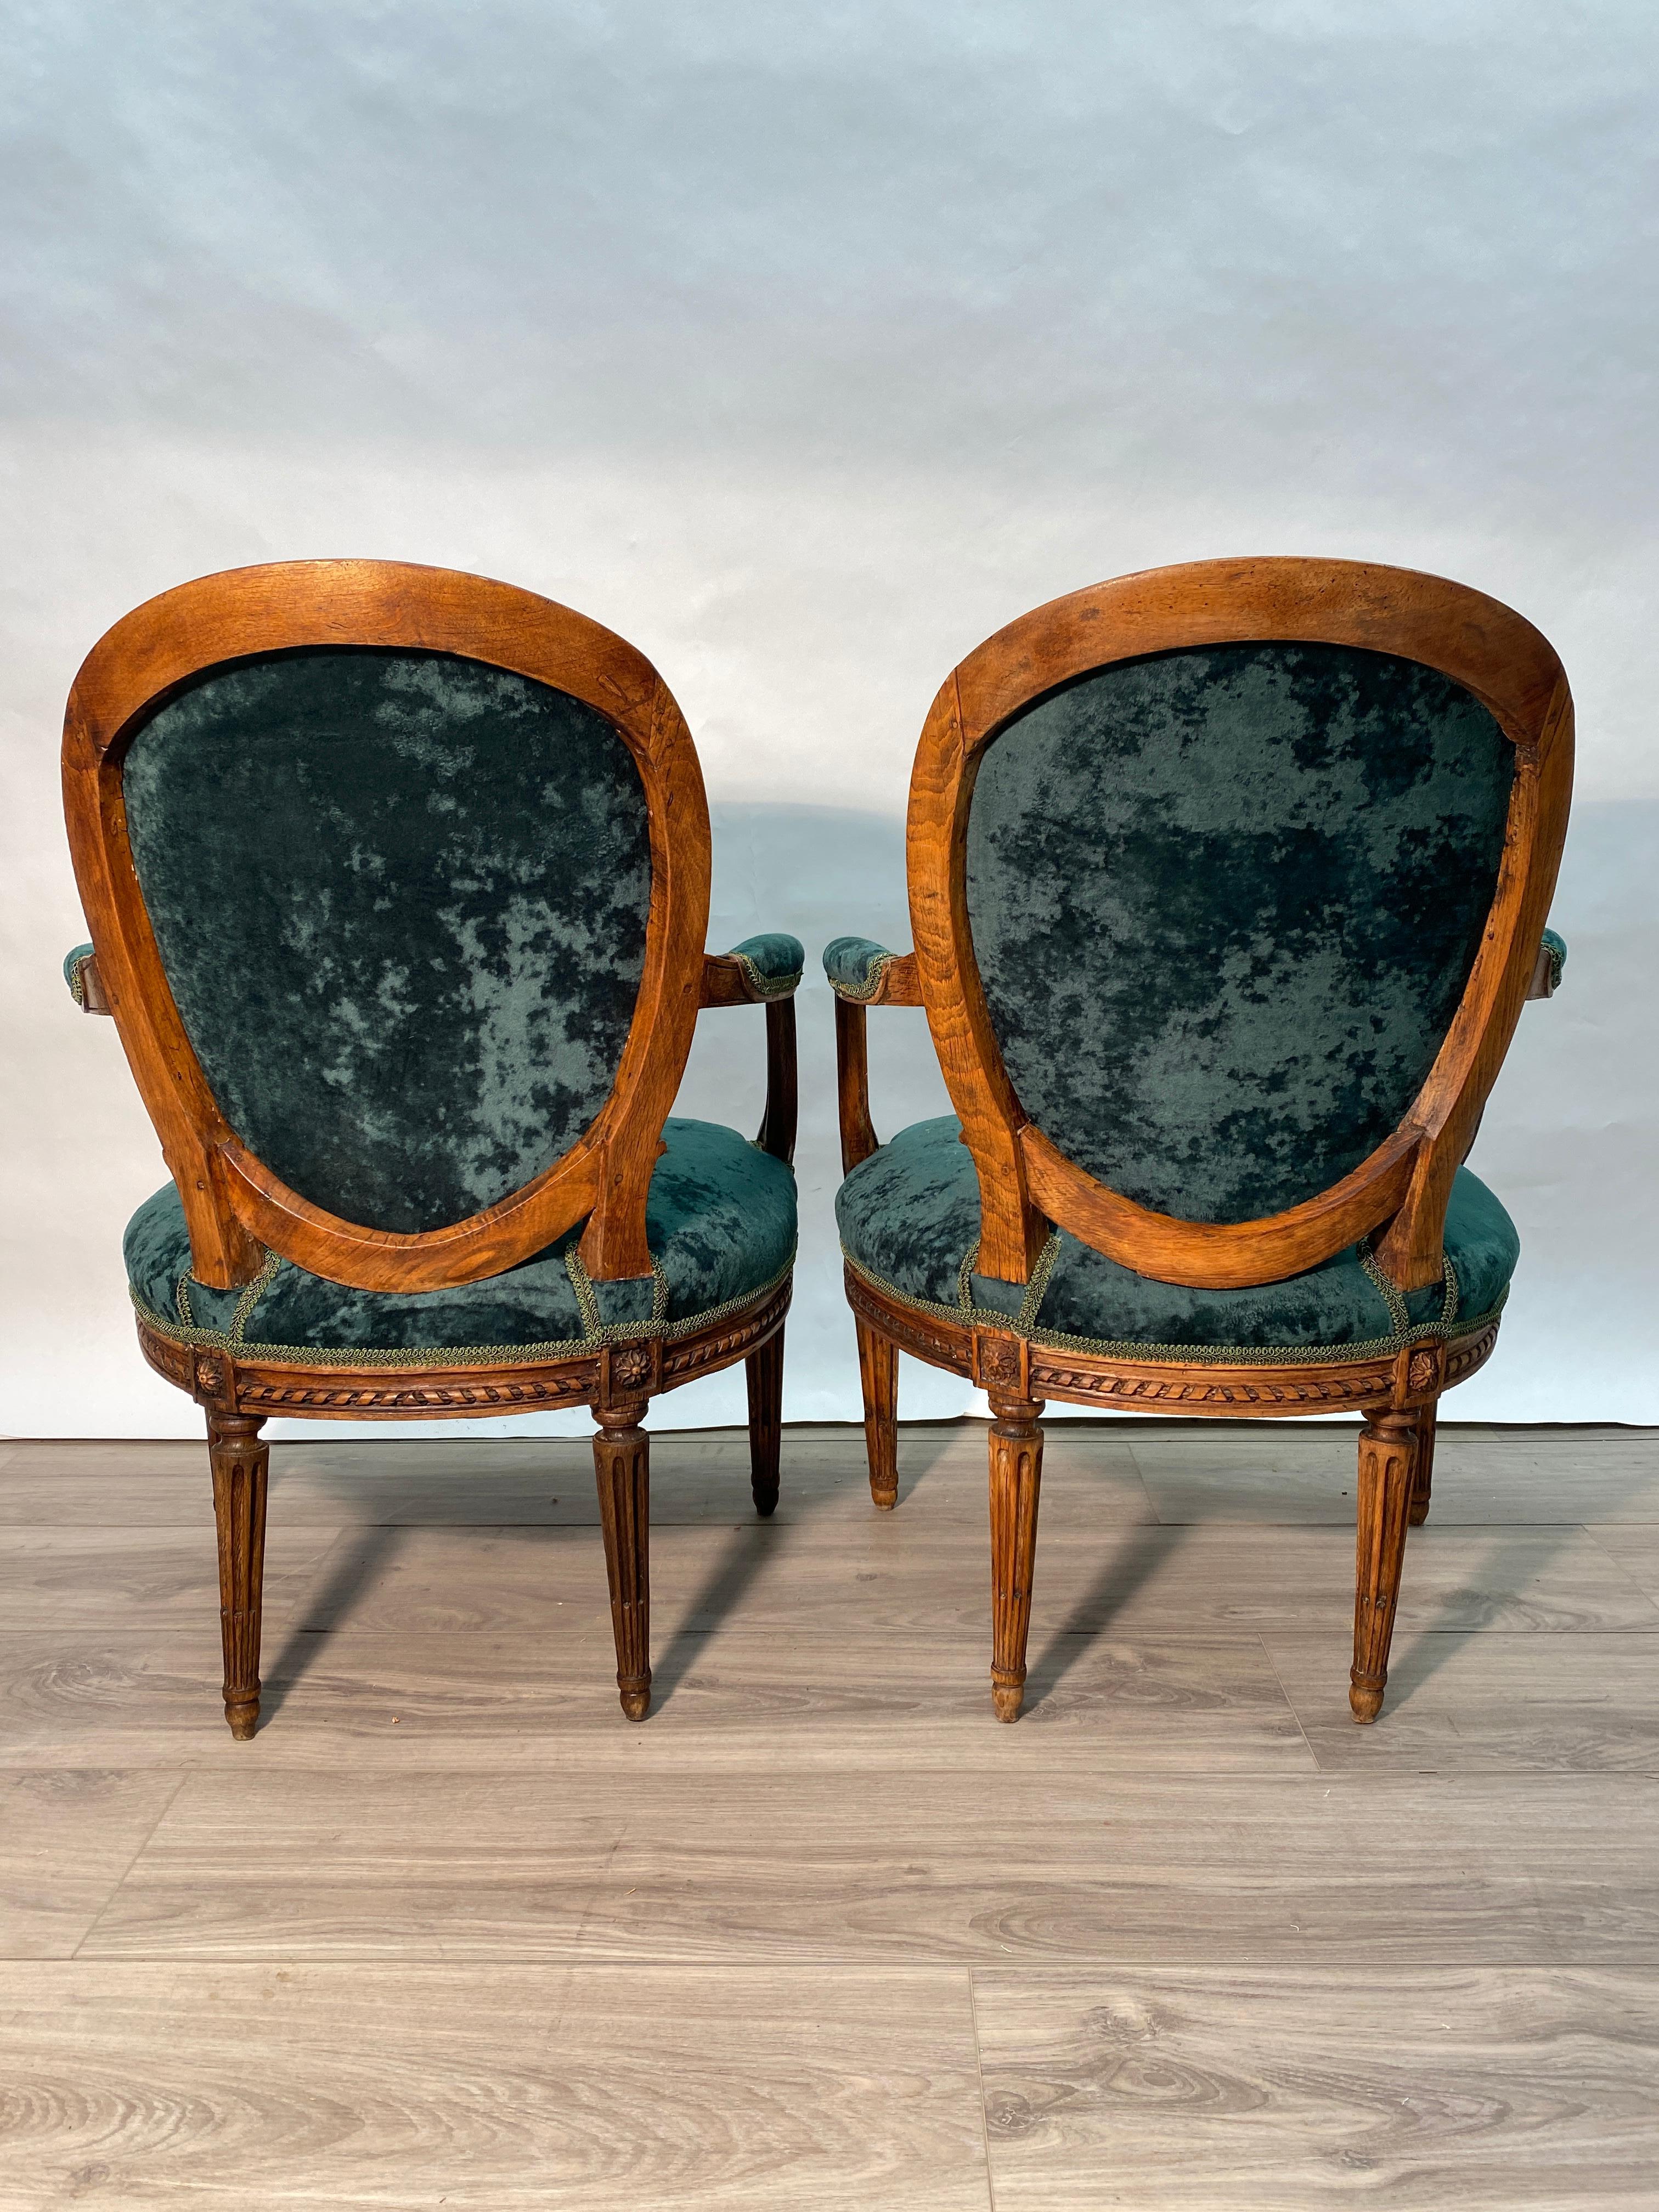 Pair of Period 18th Century French Louis XVI Walnut Fauteuil Arm Chairs For Sale 5